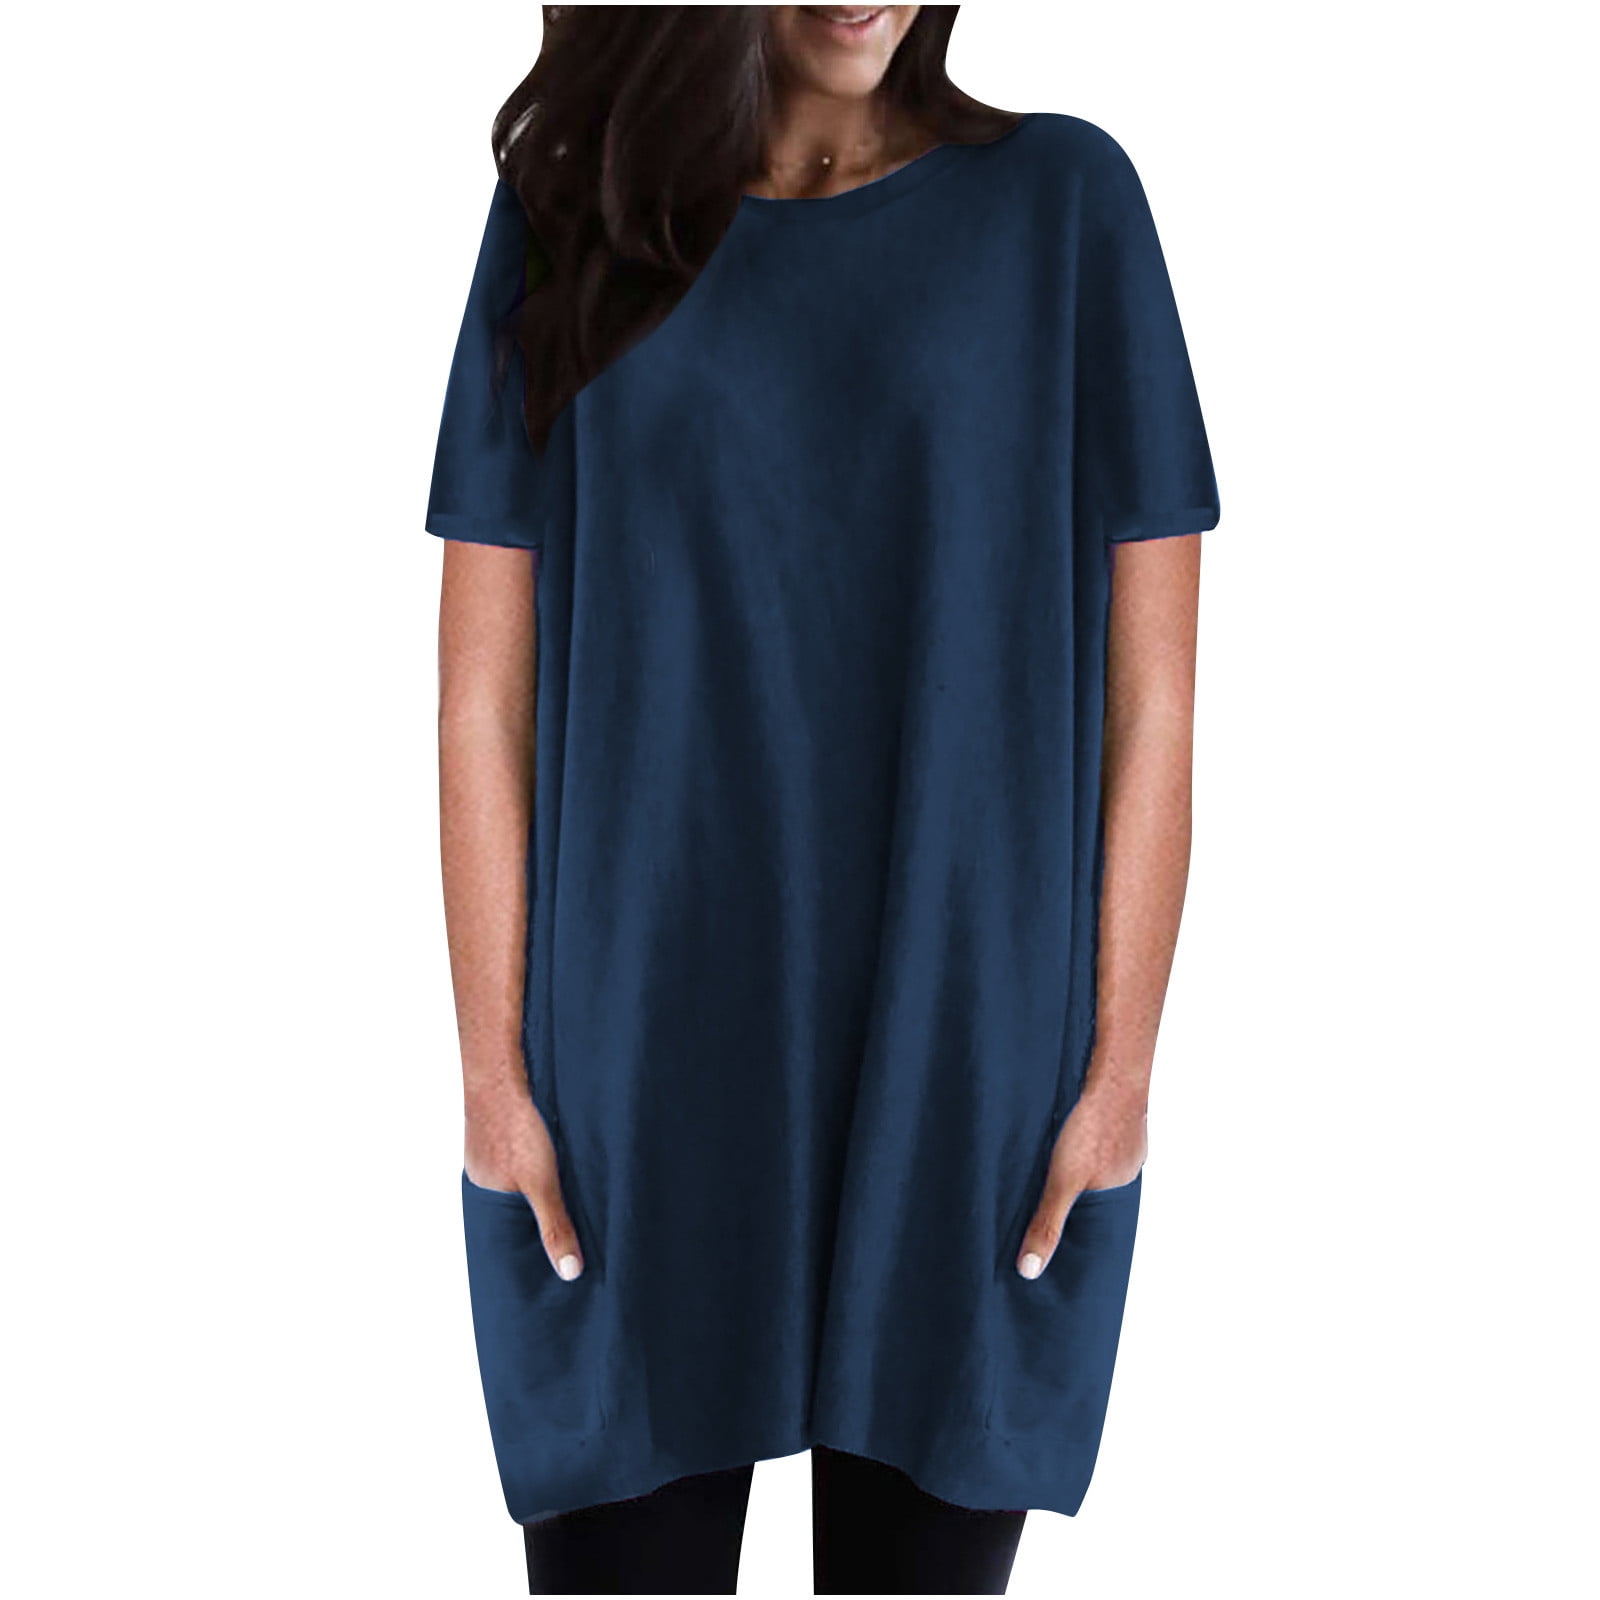 RQYYD Women's Plus Size Tops Summer Short Sleeve Crewneck Long Tunic Tops  Casual Solid Oversized Shirt Blouse to wear with leggings with Pockets(Navy,M)  